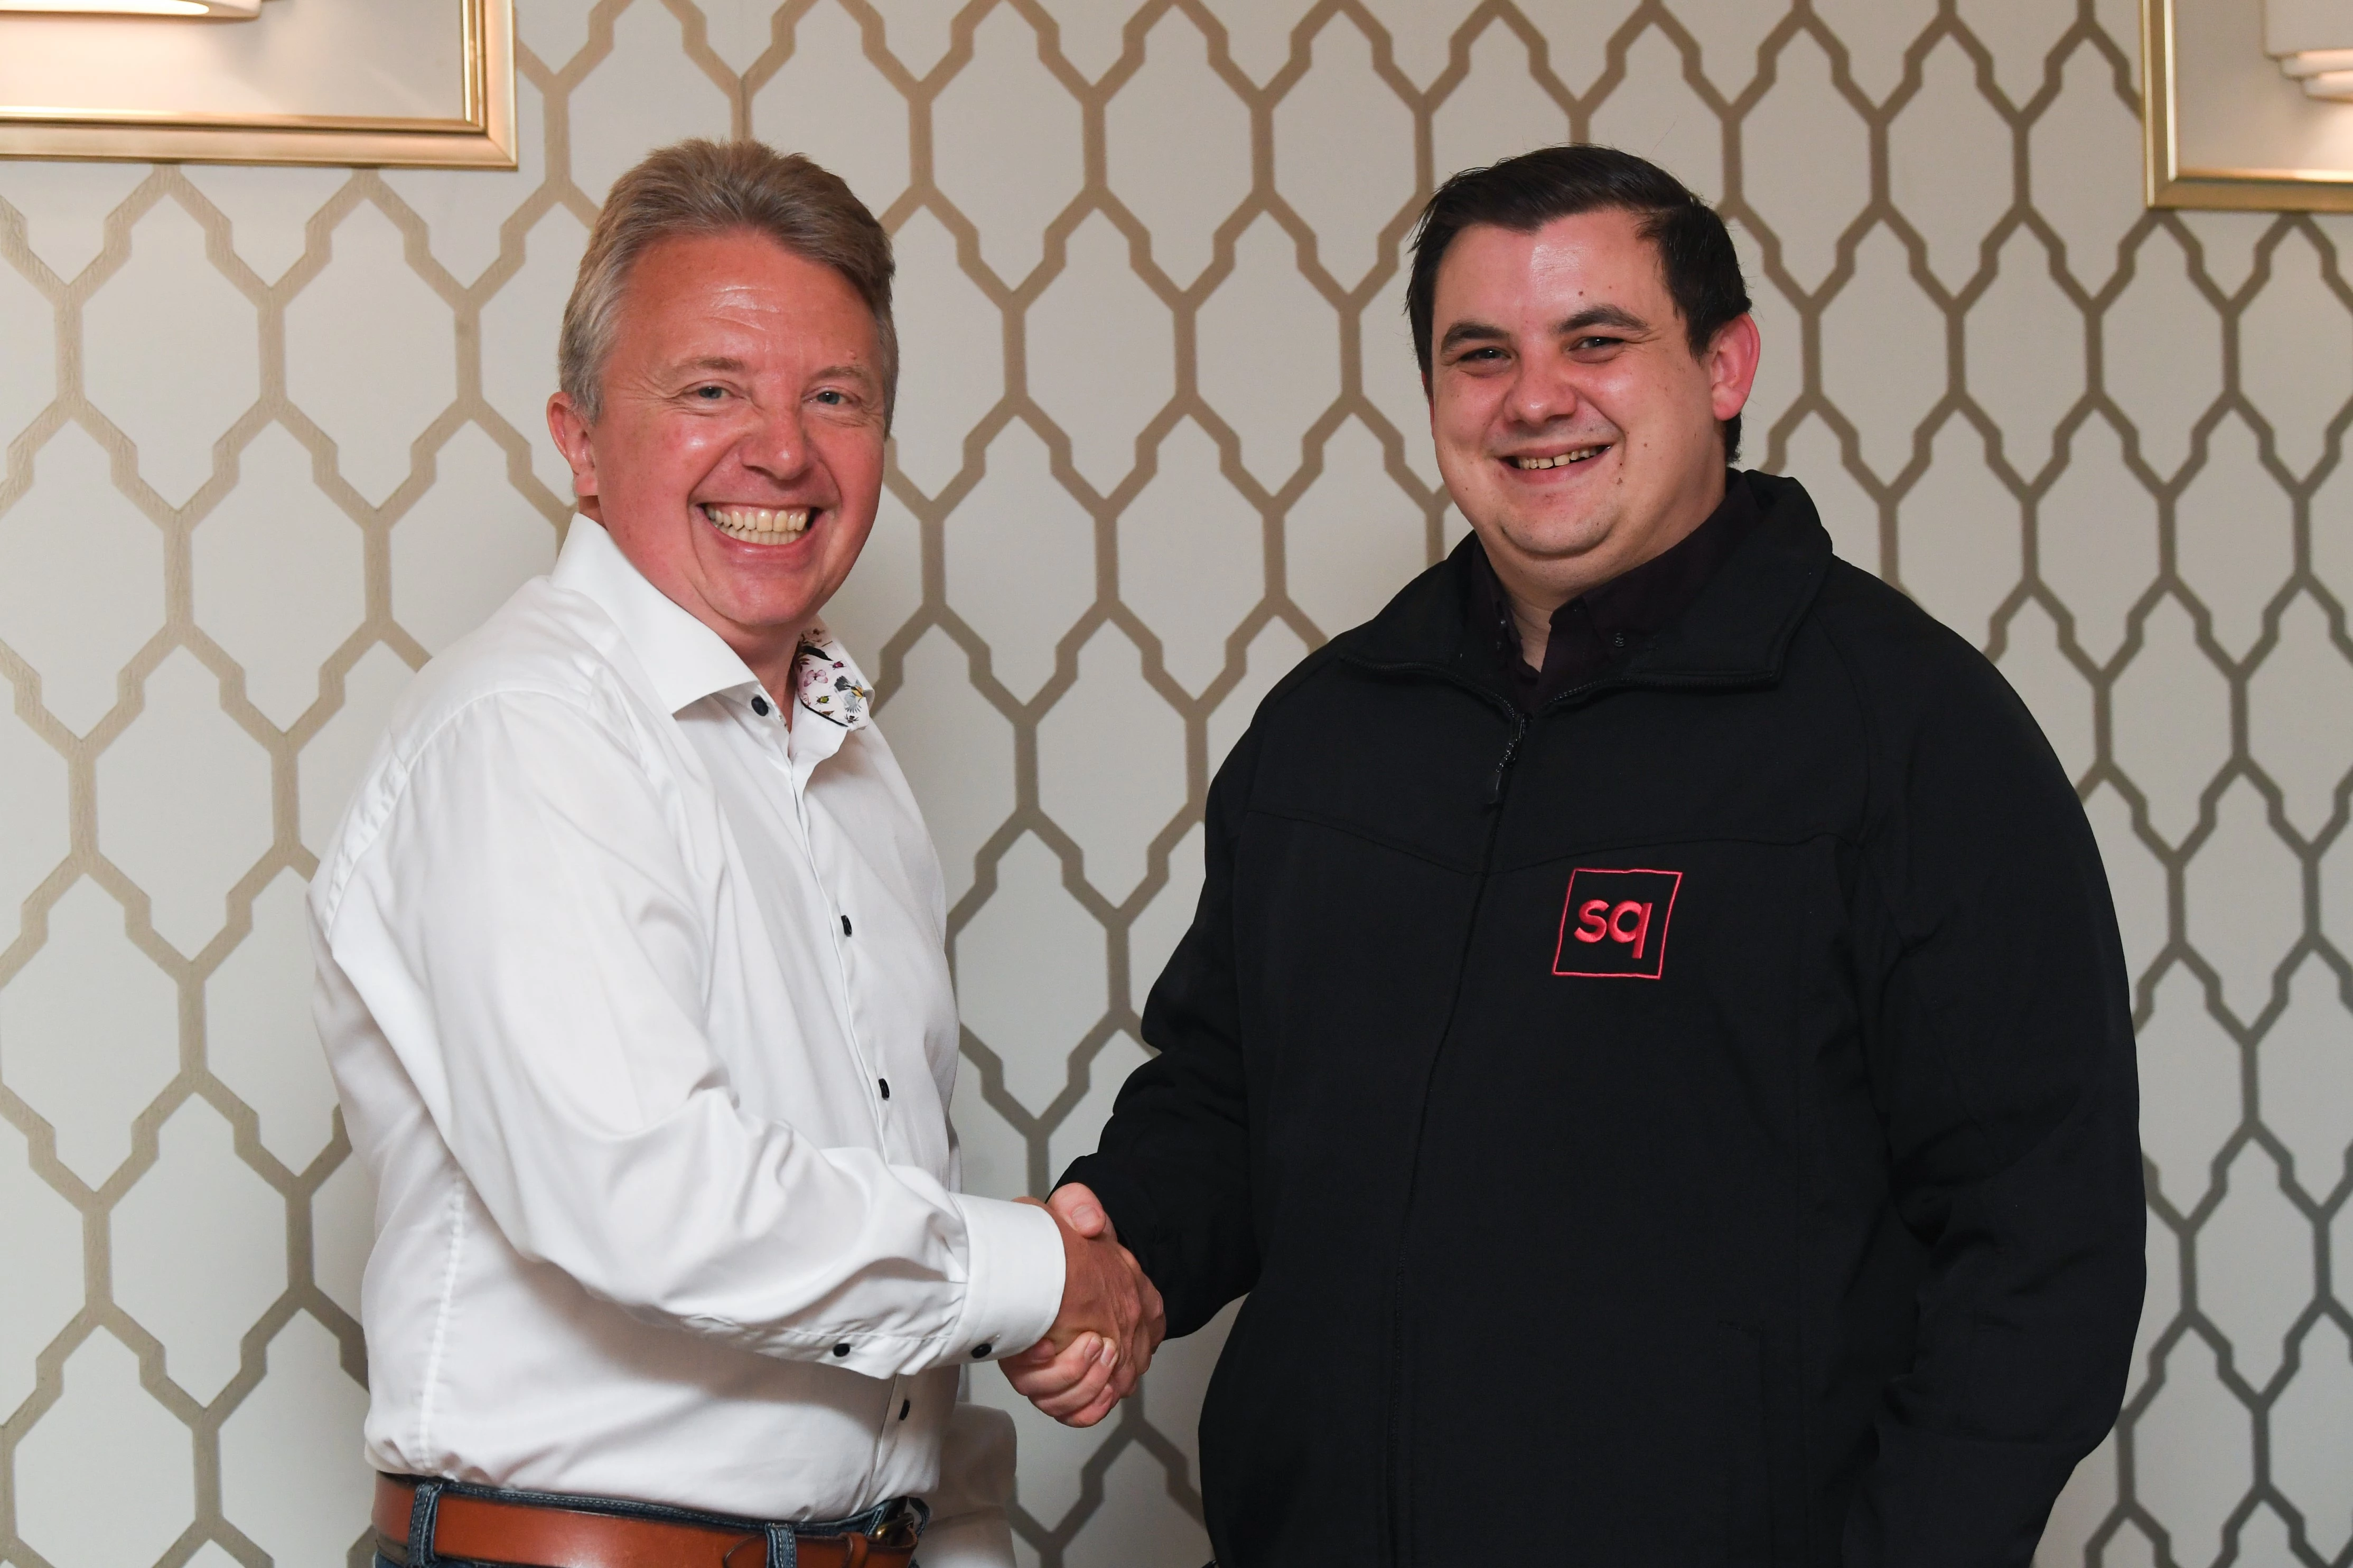 Alan Perkins of SilverDisc (left) with Matthew Rigby White of Qoob Group and Square Media (right)